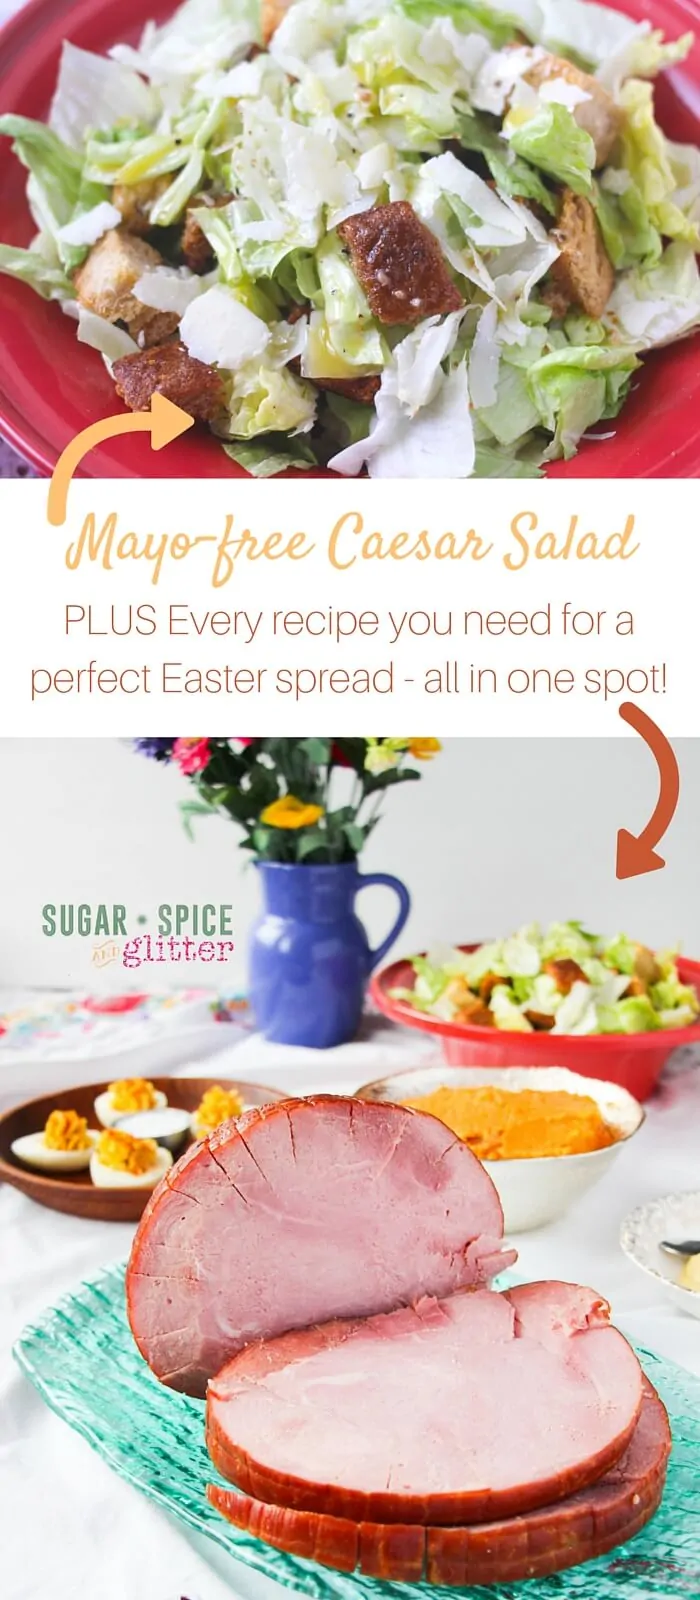 Mayo-free caesar salad recipe plus every recipe you need for a delicious Easter menu for the whole family